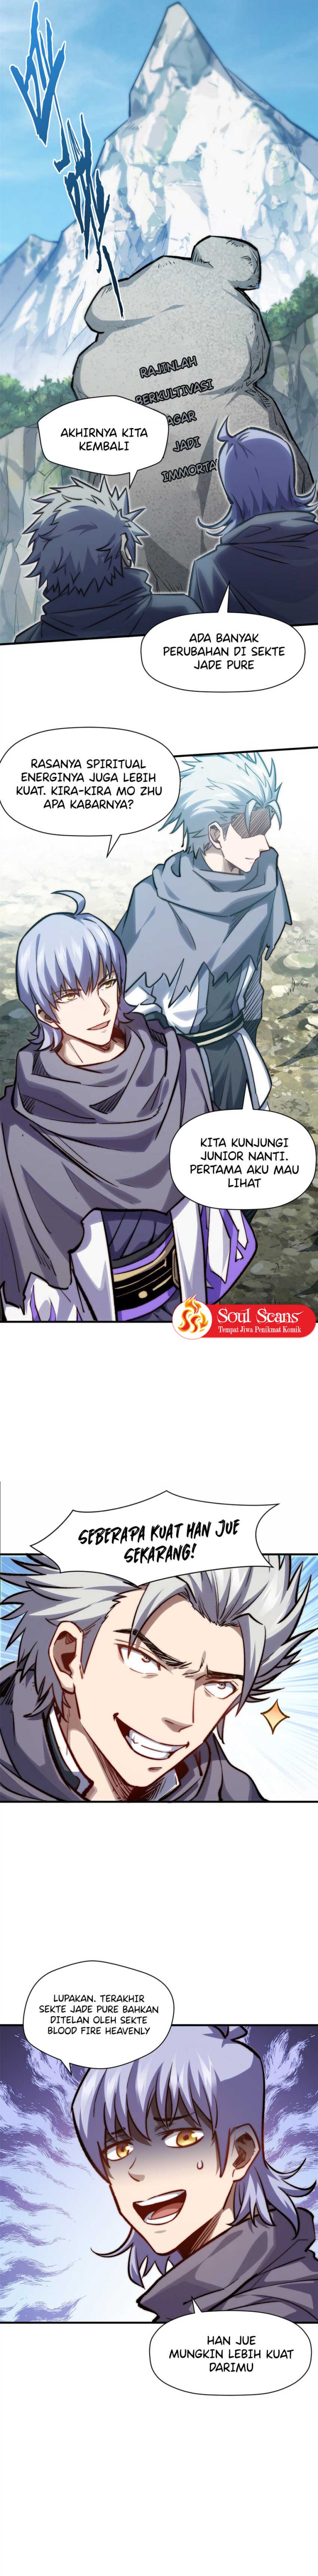 Dilarang COPAS - situs resmi www.mangacanblog.com - Komik top tier providence secretly cultivate for a thousand years 098 - chapter 98 99 Indonesia top tier providence secretly cultivate for a thousand years 098 - chapter 98 Terbaru 5|Baca Manga Komik Indonesia|Mangacan